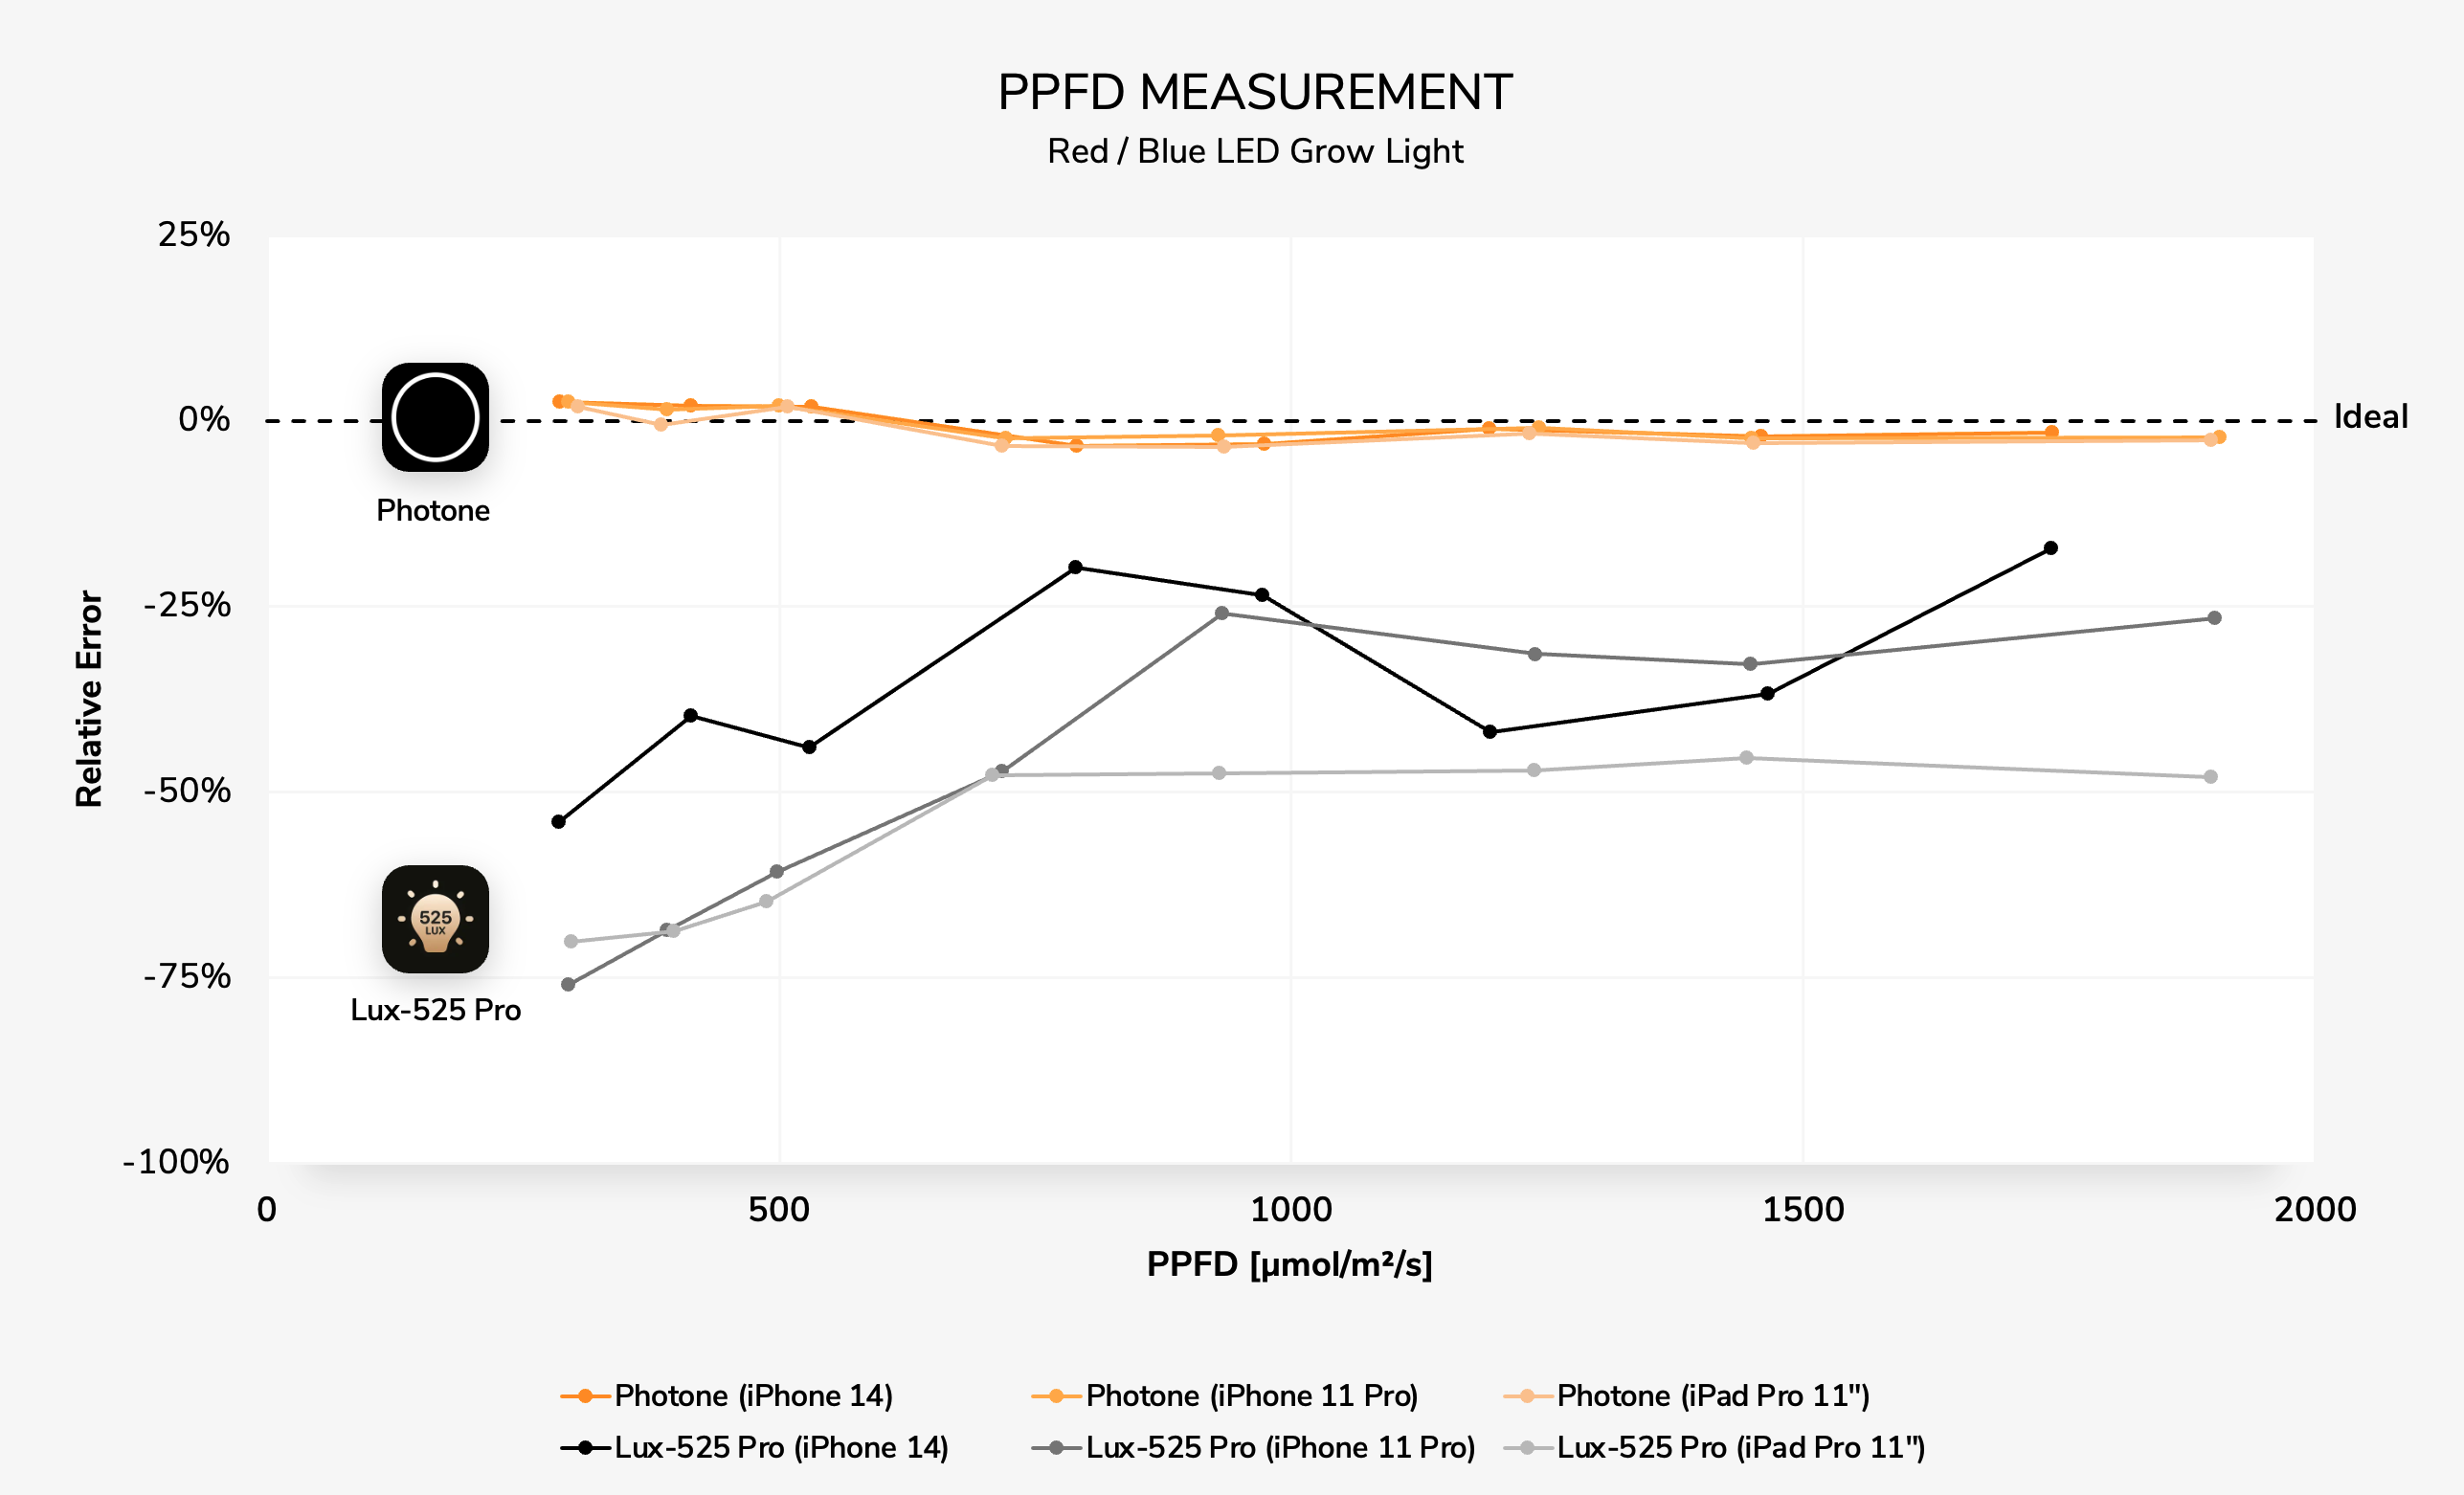 The Photone app is a very accurate PPFD meter app for blurple LED plant grow lights